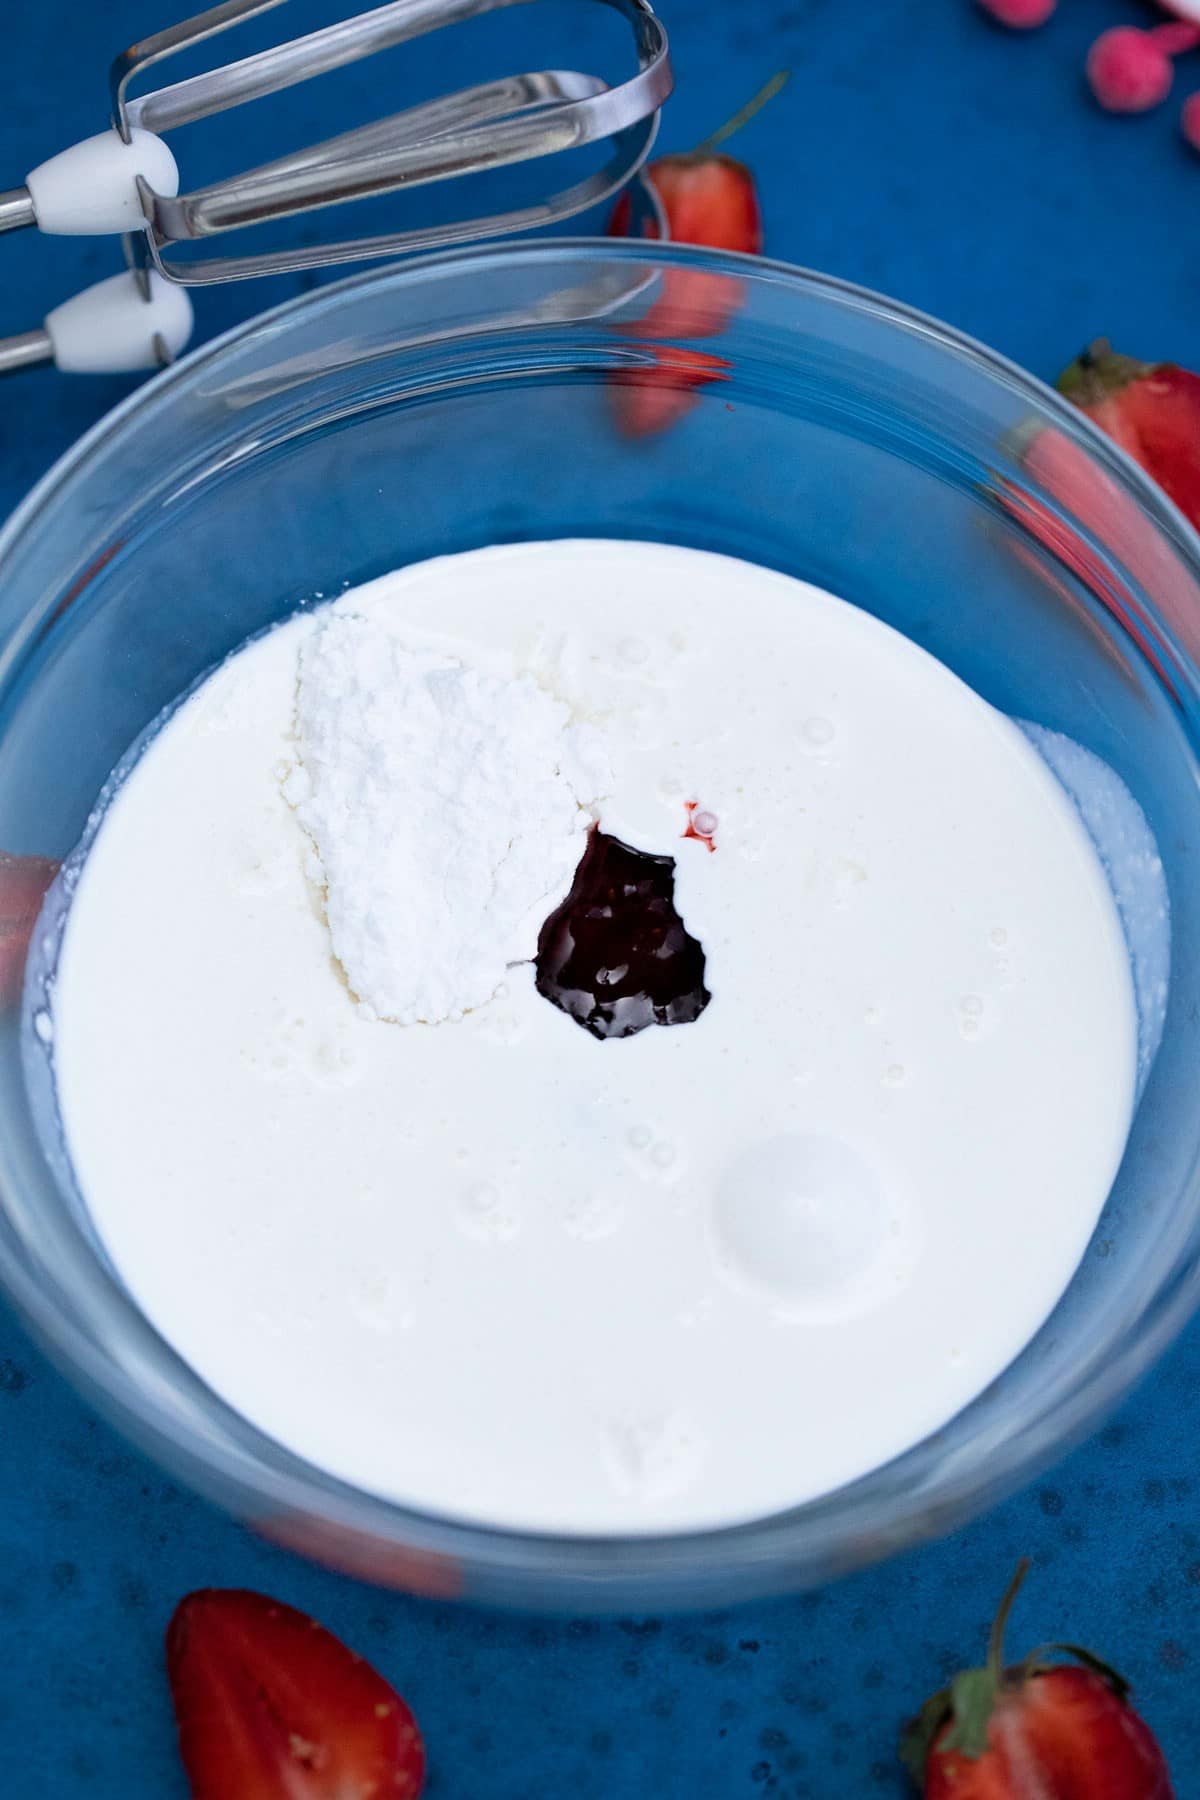 Whipping cream ingredients